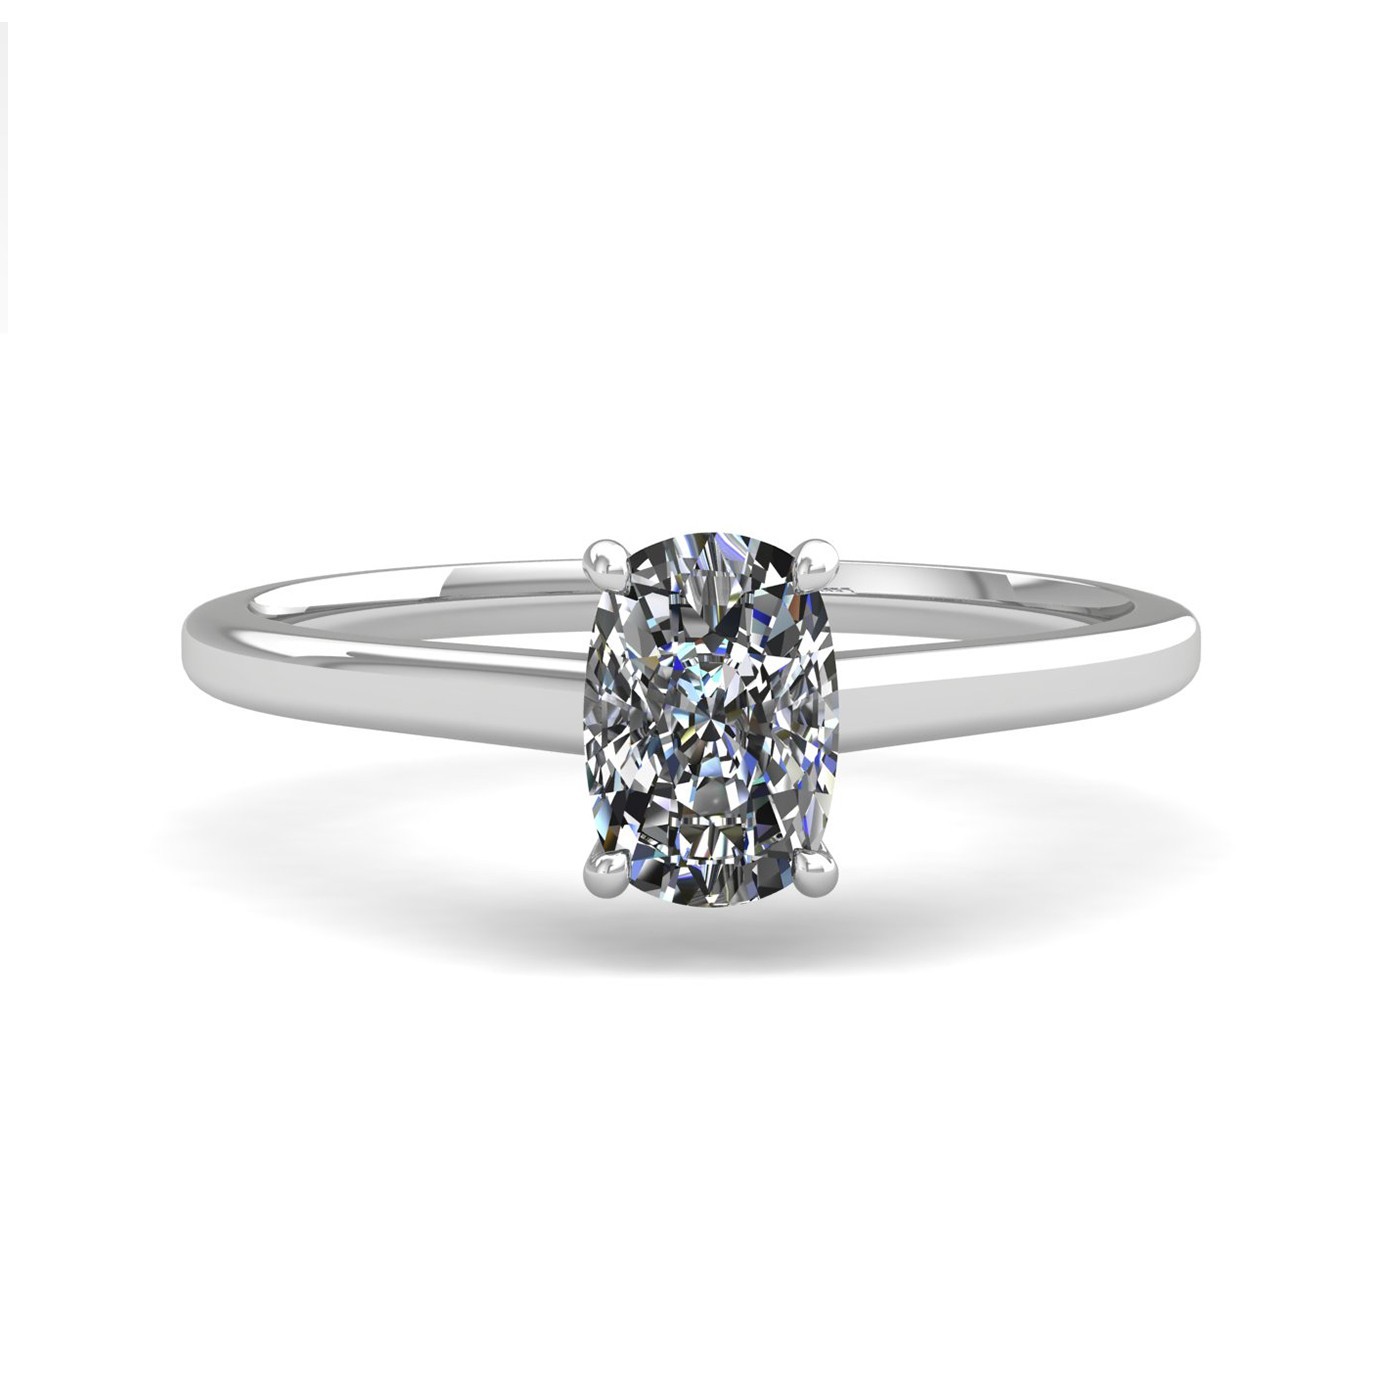 18k white gold  0,50 ct 4 prongs solitaire elongated cushion cut diamond engagement ring with whisper thin band Photos & images